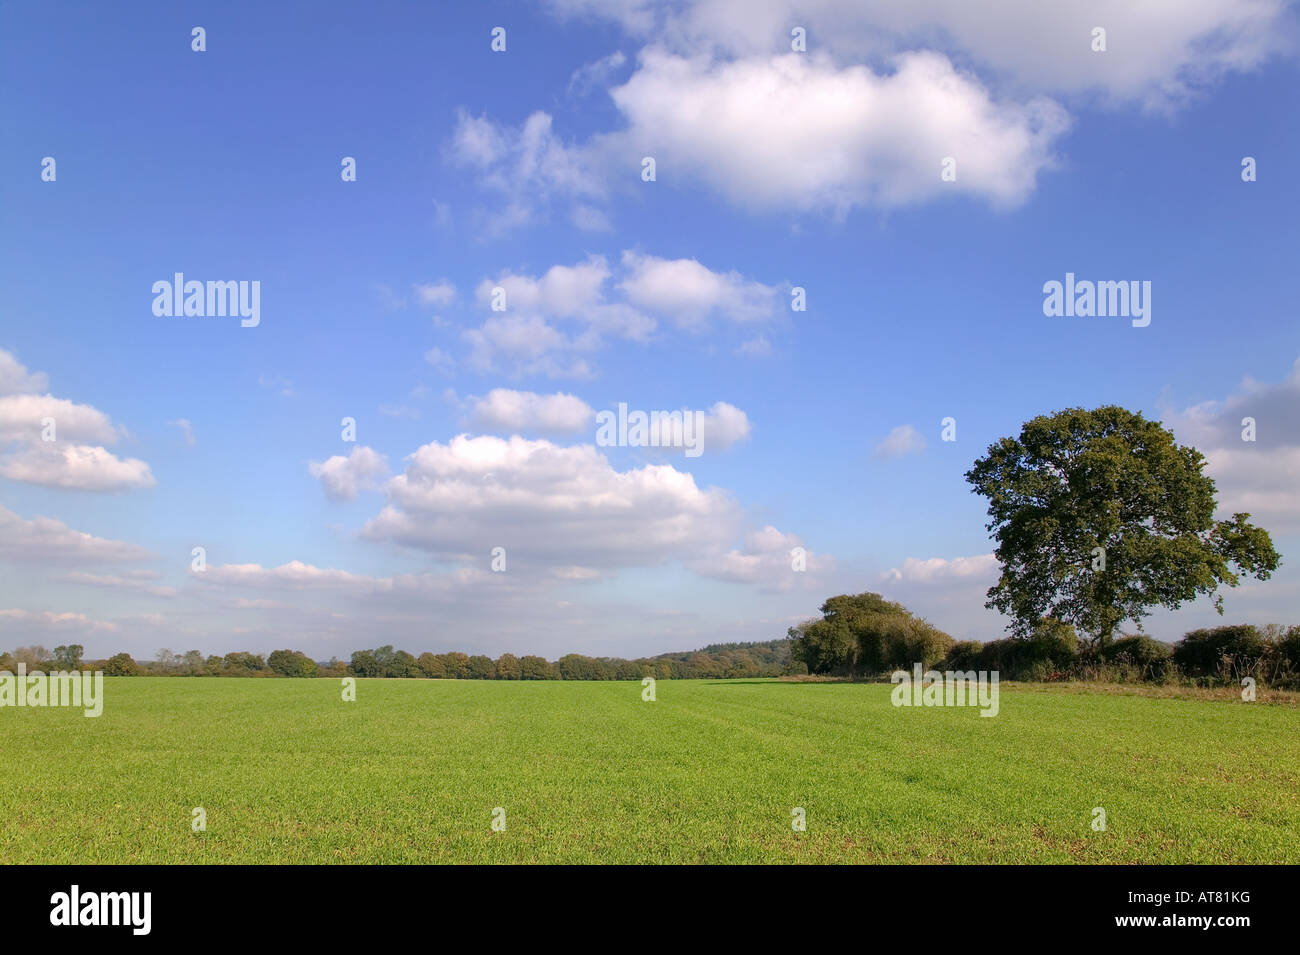 Green field landscape under blue cloudy sky on a sunny day Stock Photo